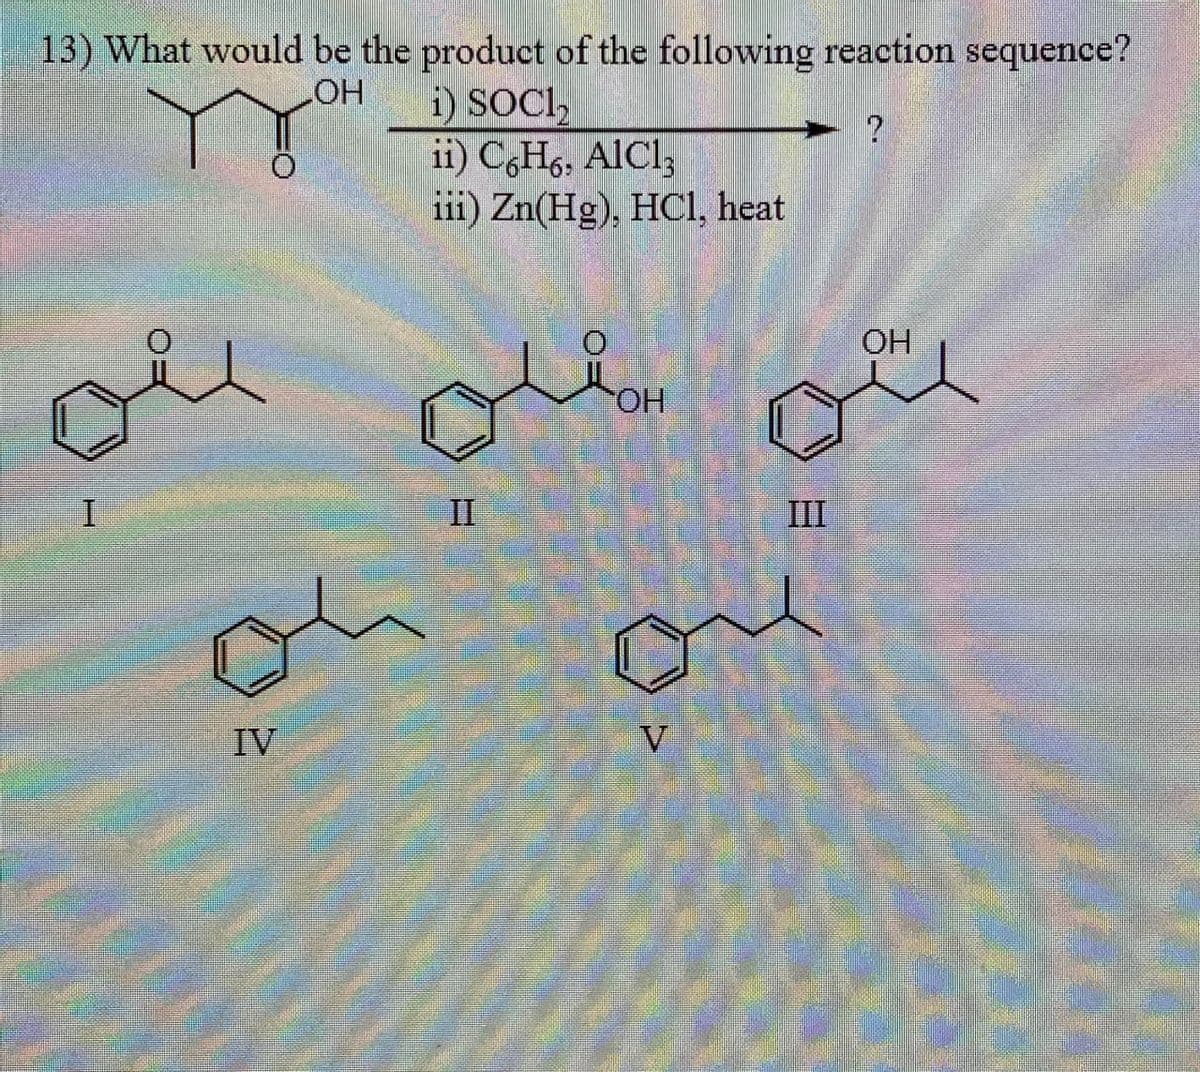 13) What would be the product of the following reaction sequence?
LOH
i) SOCI,
ii) C6H6, AlCl3
iii) Zn(Hg), HCl, heat
?
OH
OH
I
IV
II
III
он
V